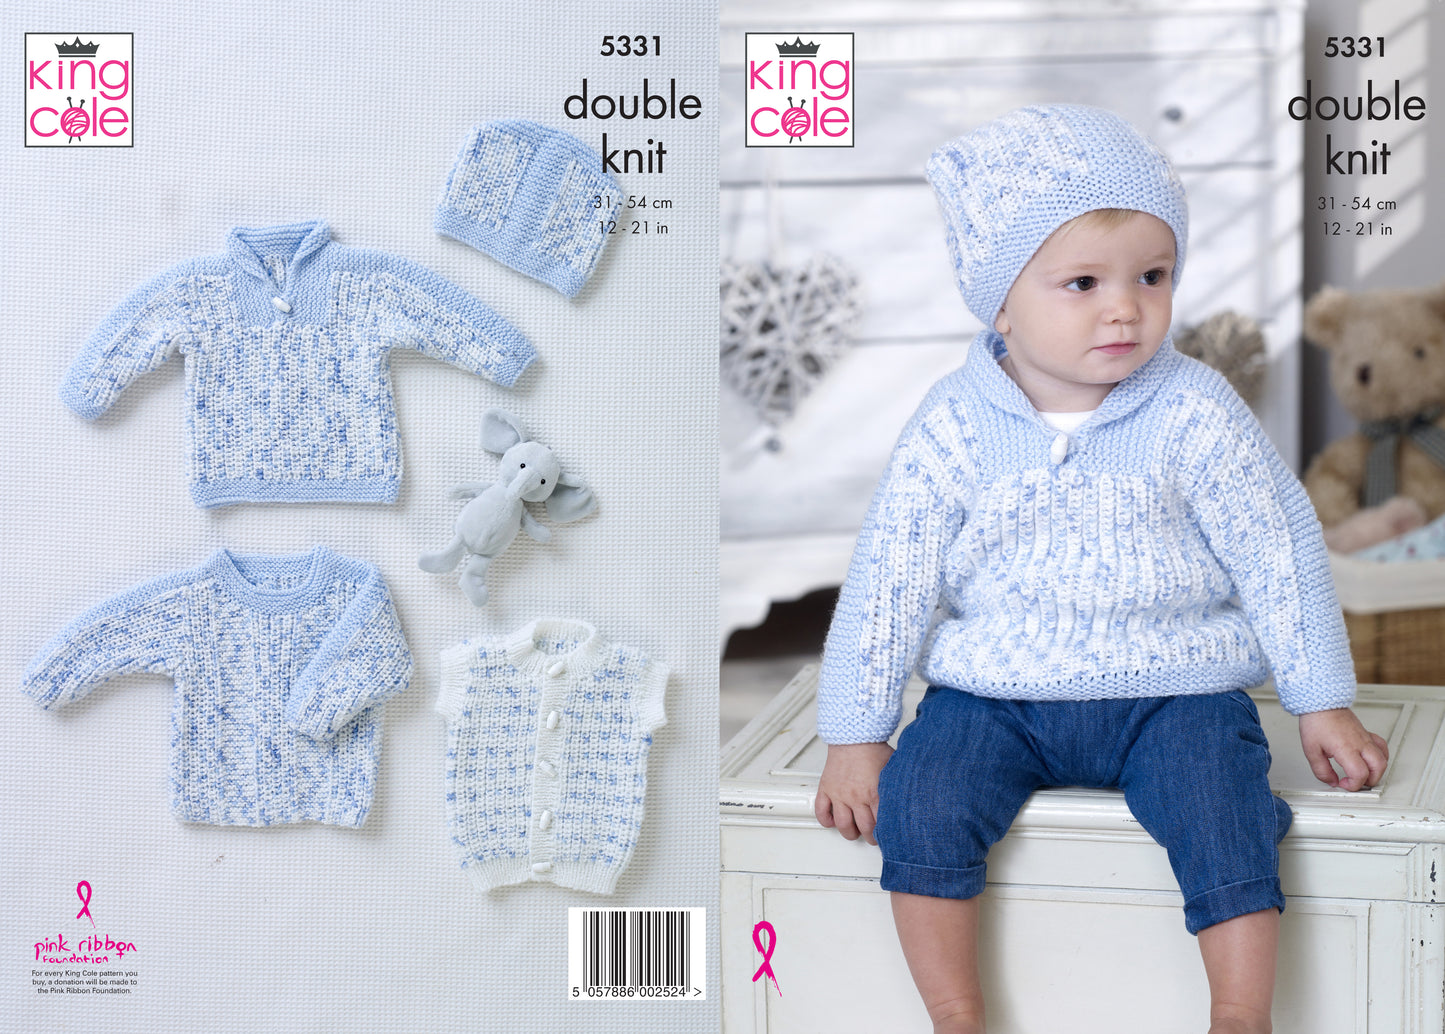 Sweaters, Gilet & Hat Knitted in Cherish Dash DK 5331